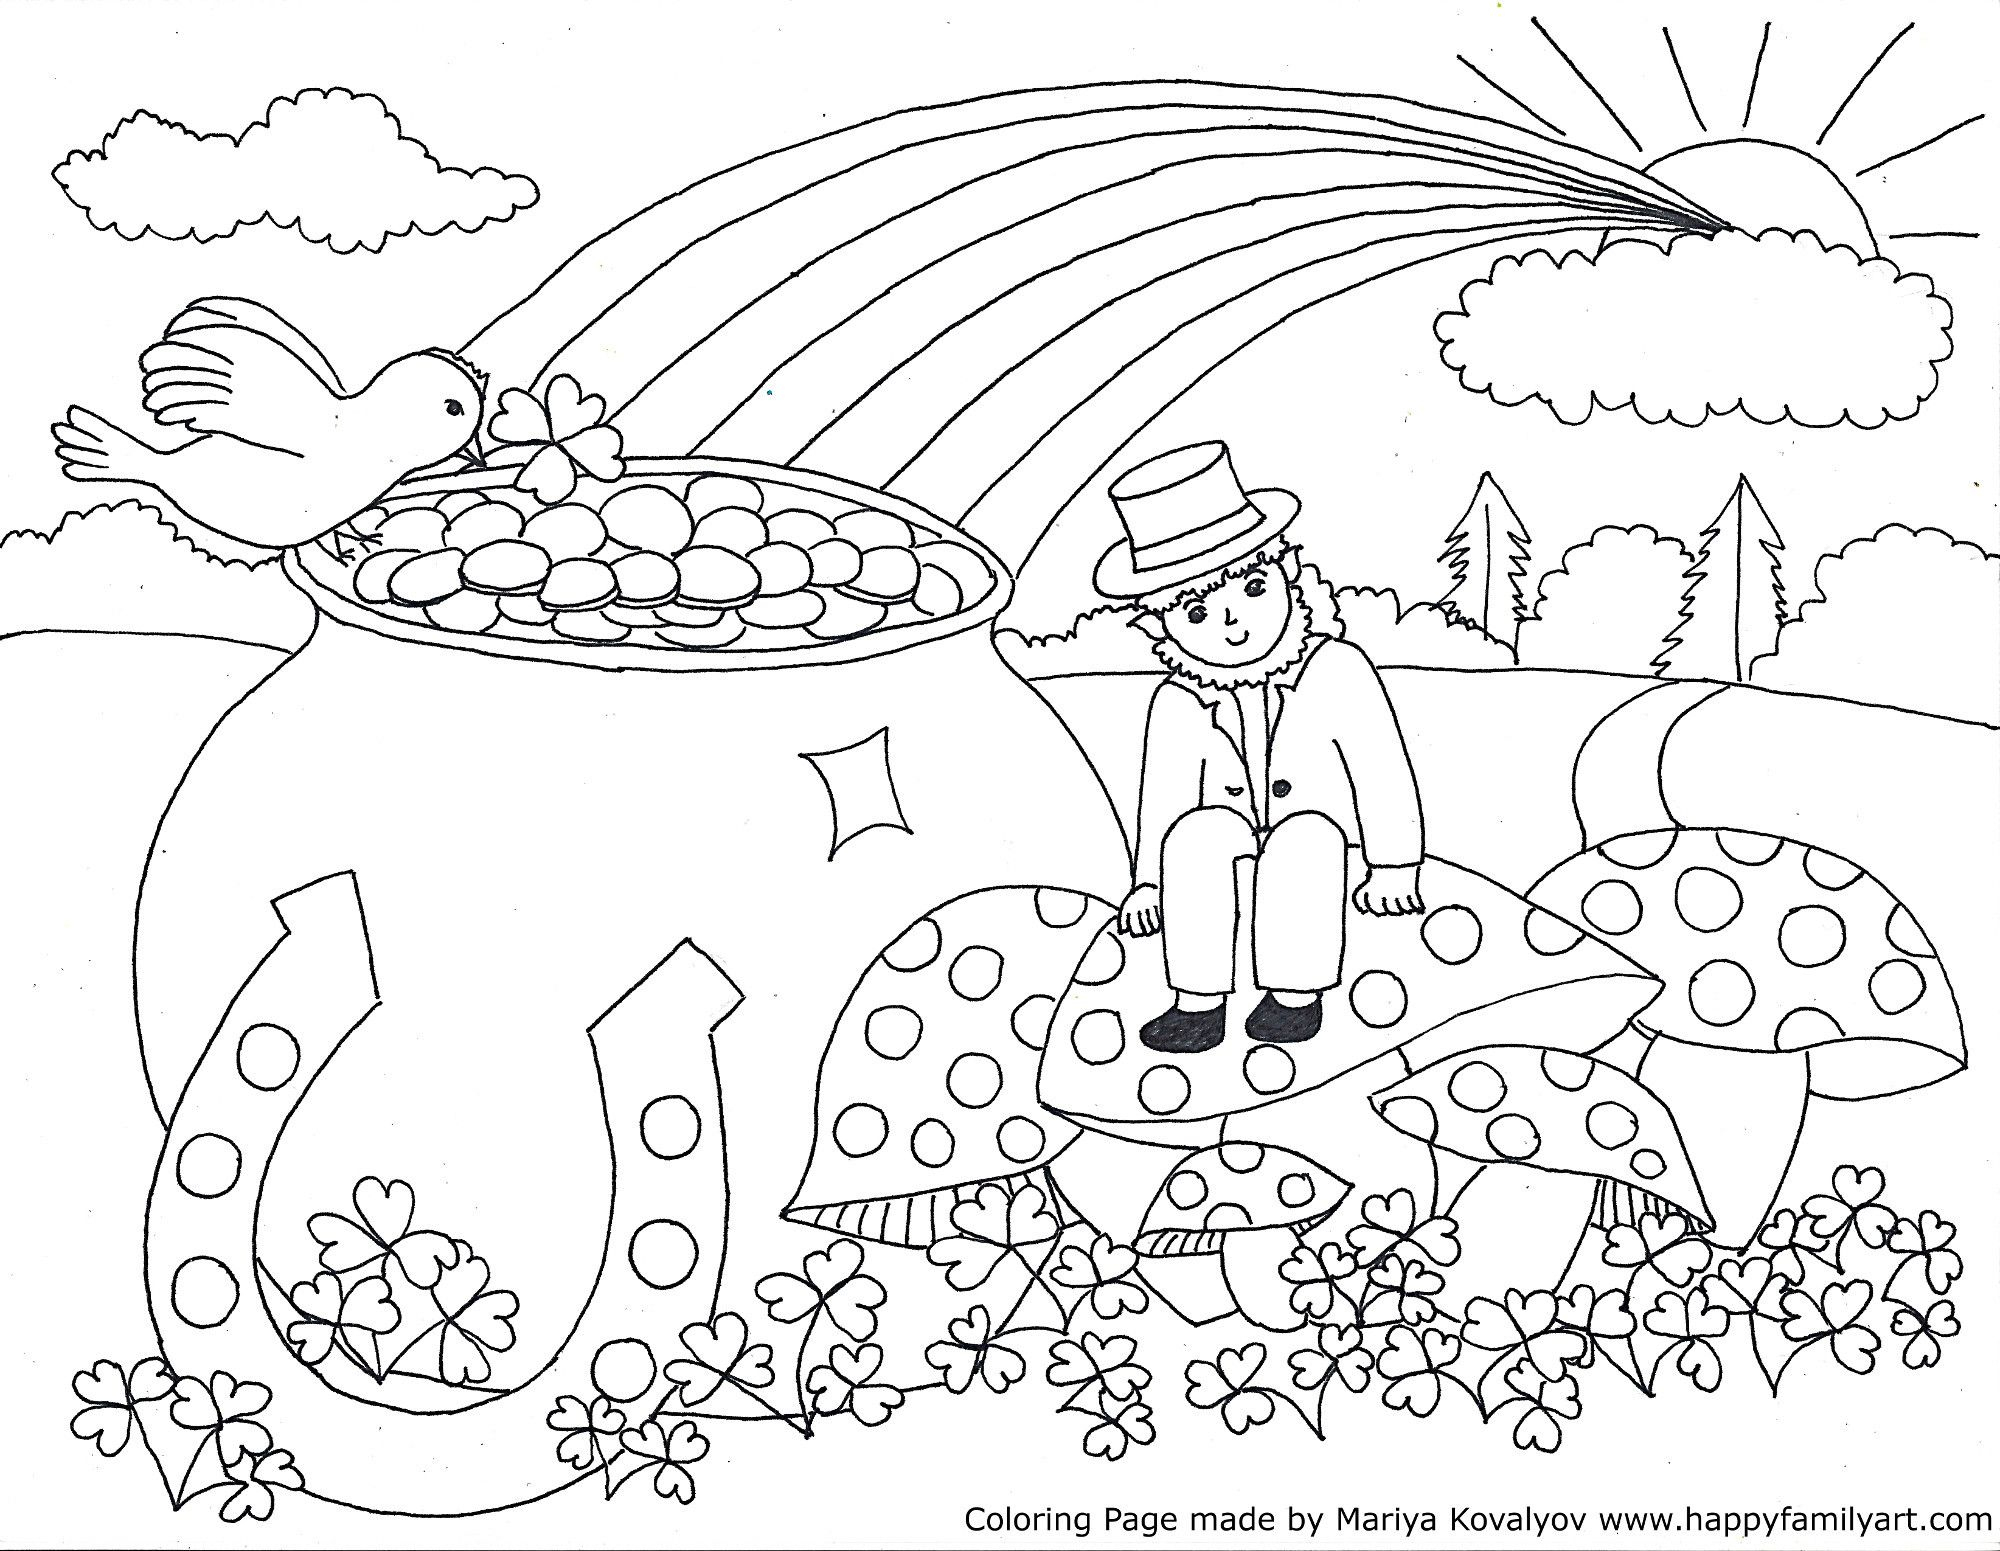 Coloring Pages : Coloring Pagesree Sheetsor Kindergarten St Patricks - Free Printable Saint Patrick Coloring Pages